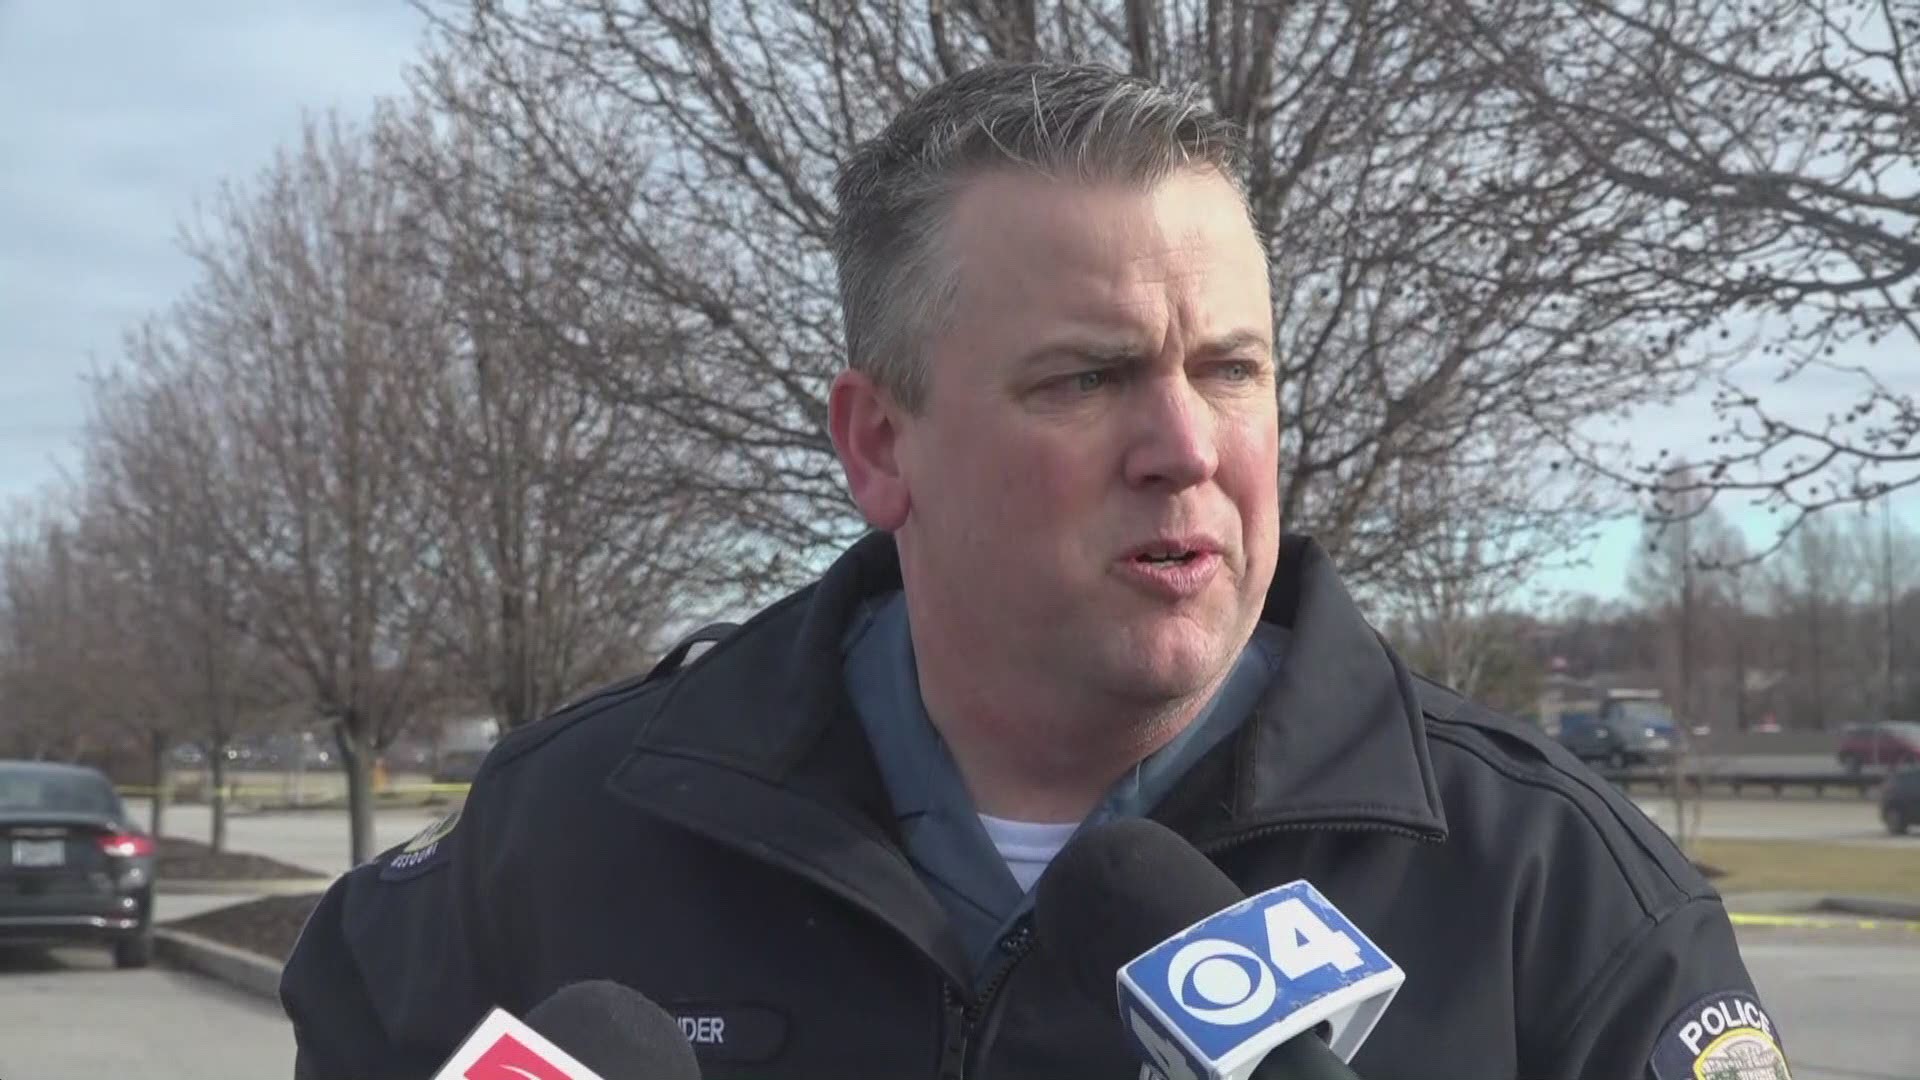 Chesterfield Police Sgt. Keith Rider provided an update after the deadly officer-involved shooting at the Taubman Prestige Outlets Tuesday.